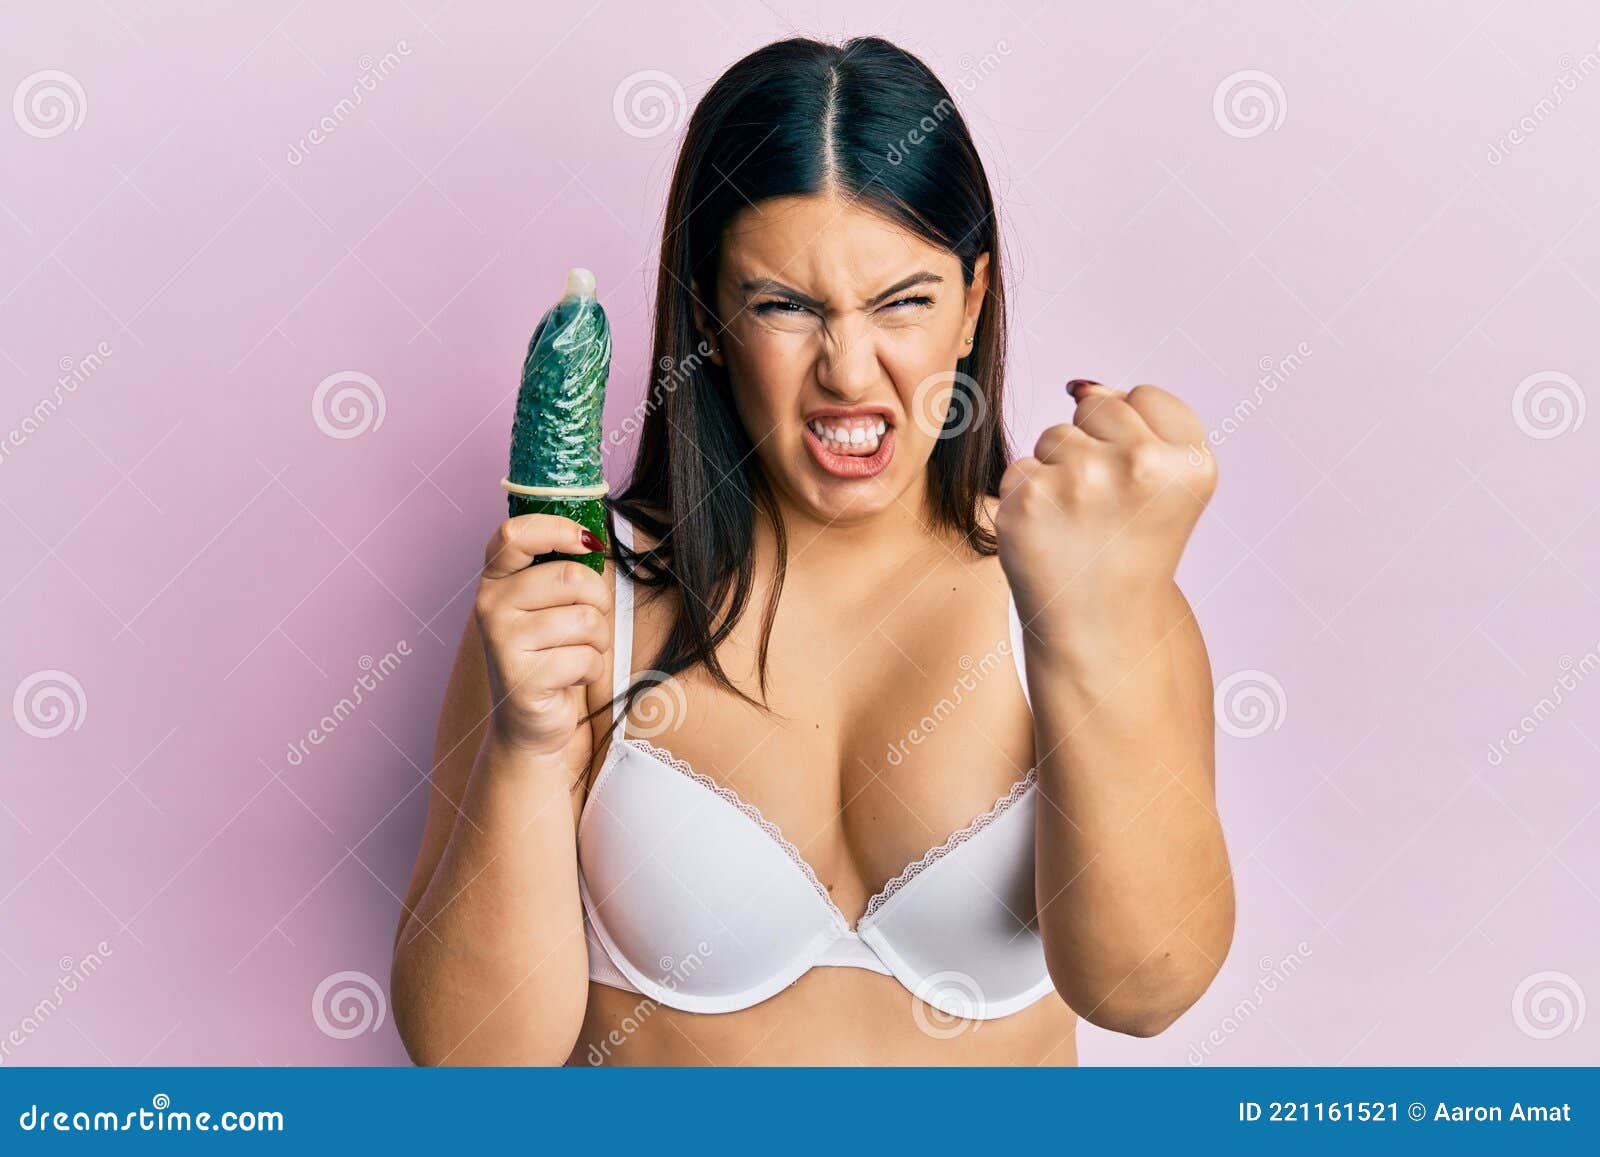 Beautiful Brunette Woman Holding Condom on Cucumber for Sex Education Annoyed and Frustrated Shouting with Anger, Yelling Crazy Stock Image photo